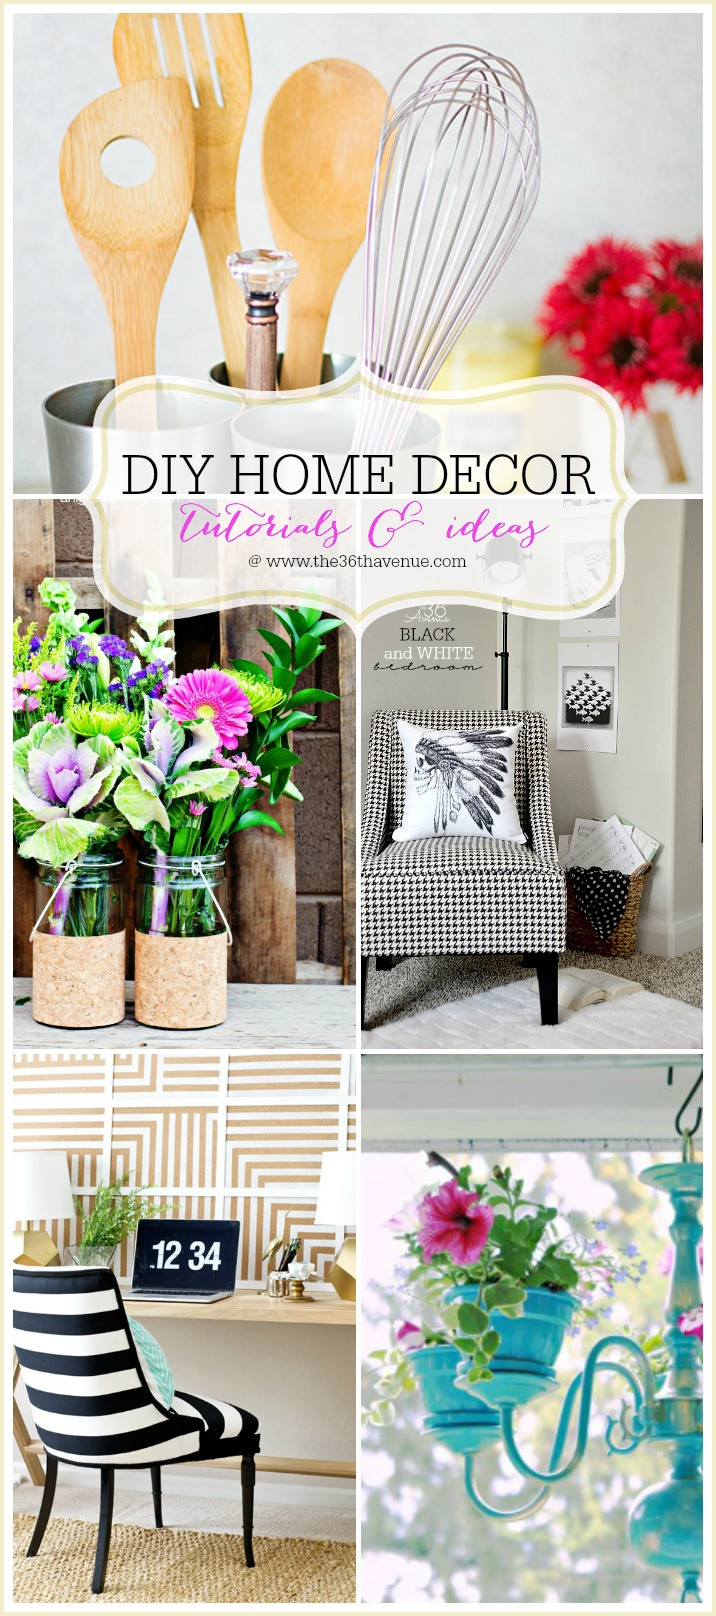 Home Decorating DIY
 The 36th AVENUE Home Decor DIY Projects